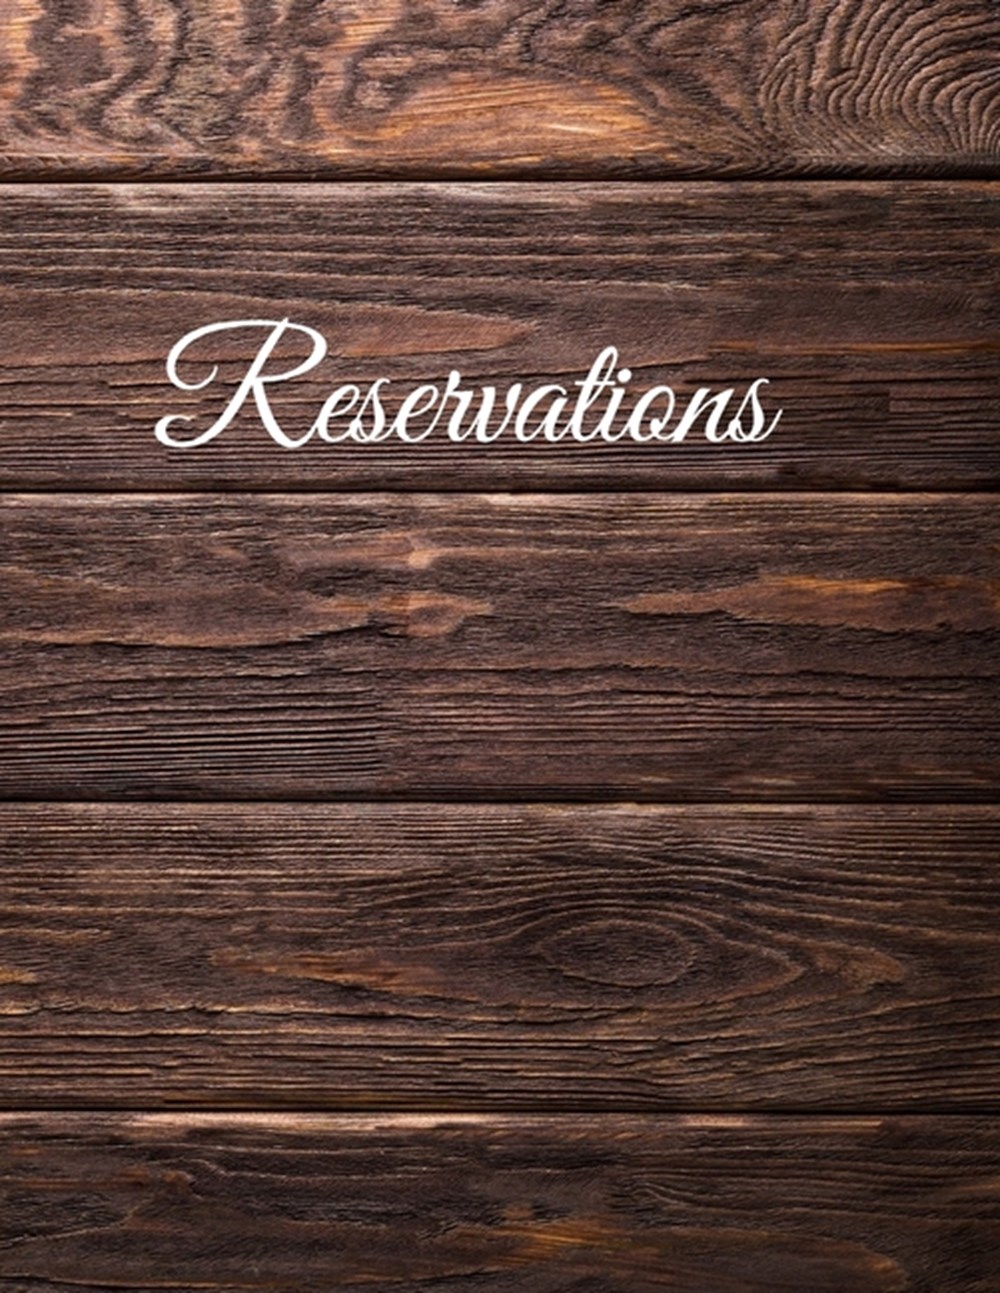 Reservations Black Faux Leather Reservation Book for Restaurant - 6 Months Guest Booking Diary - Hos